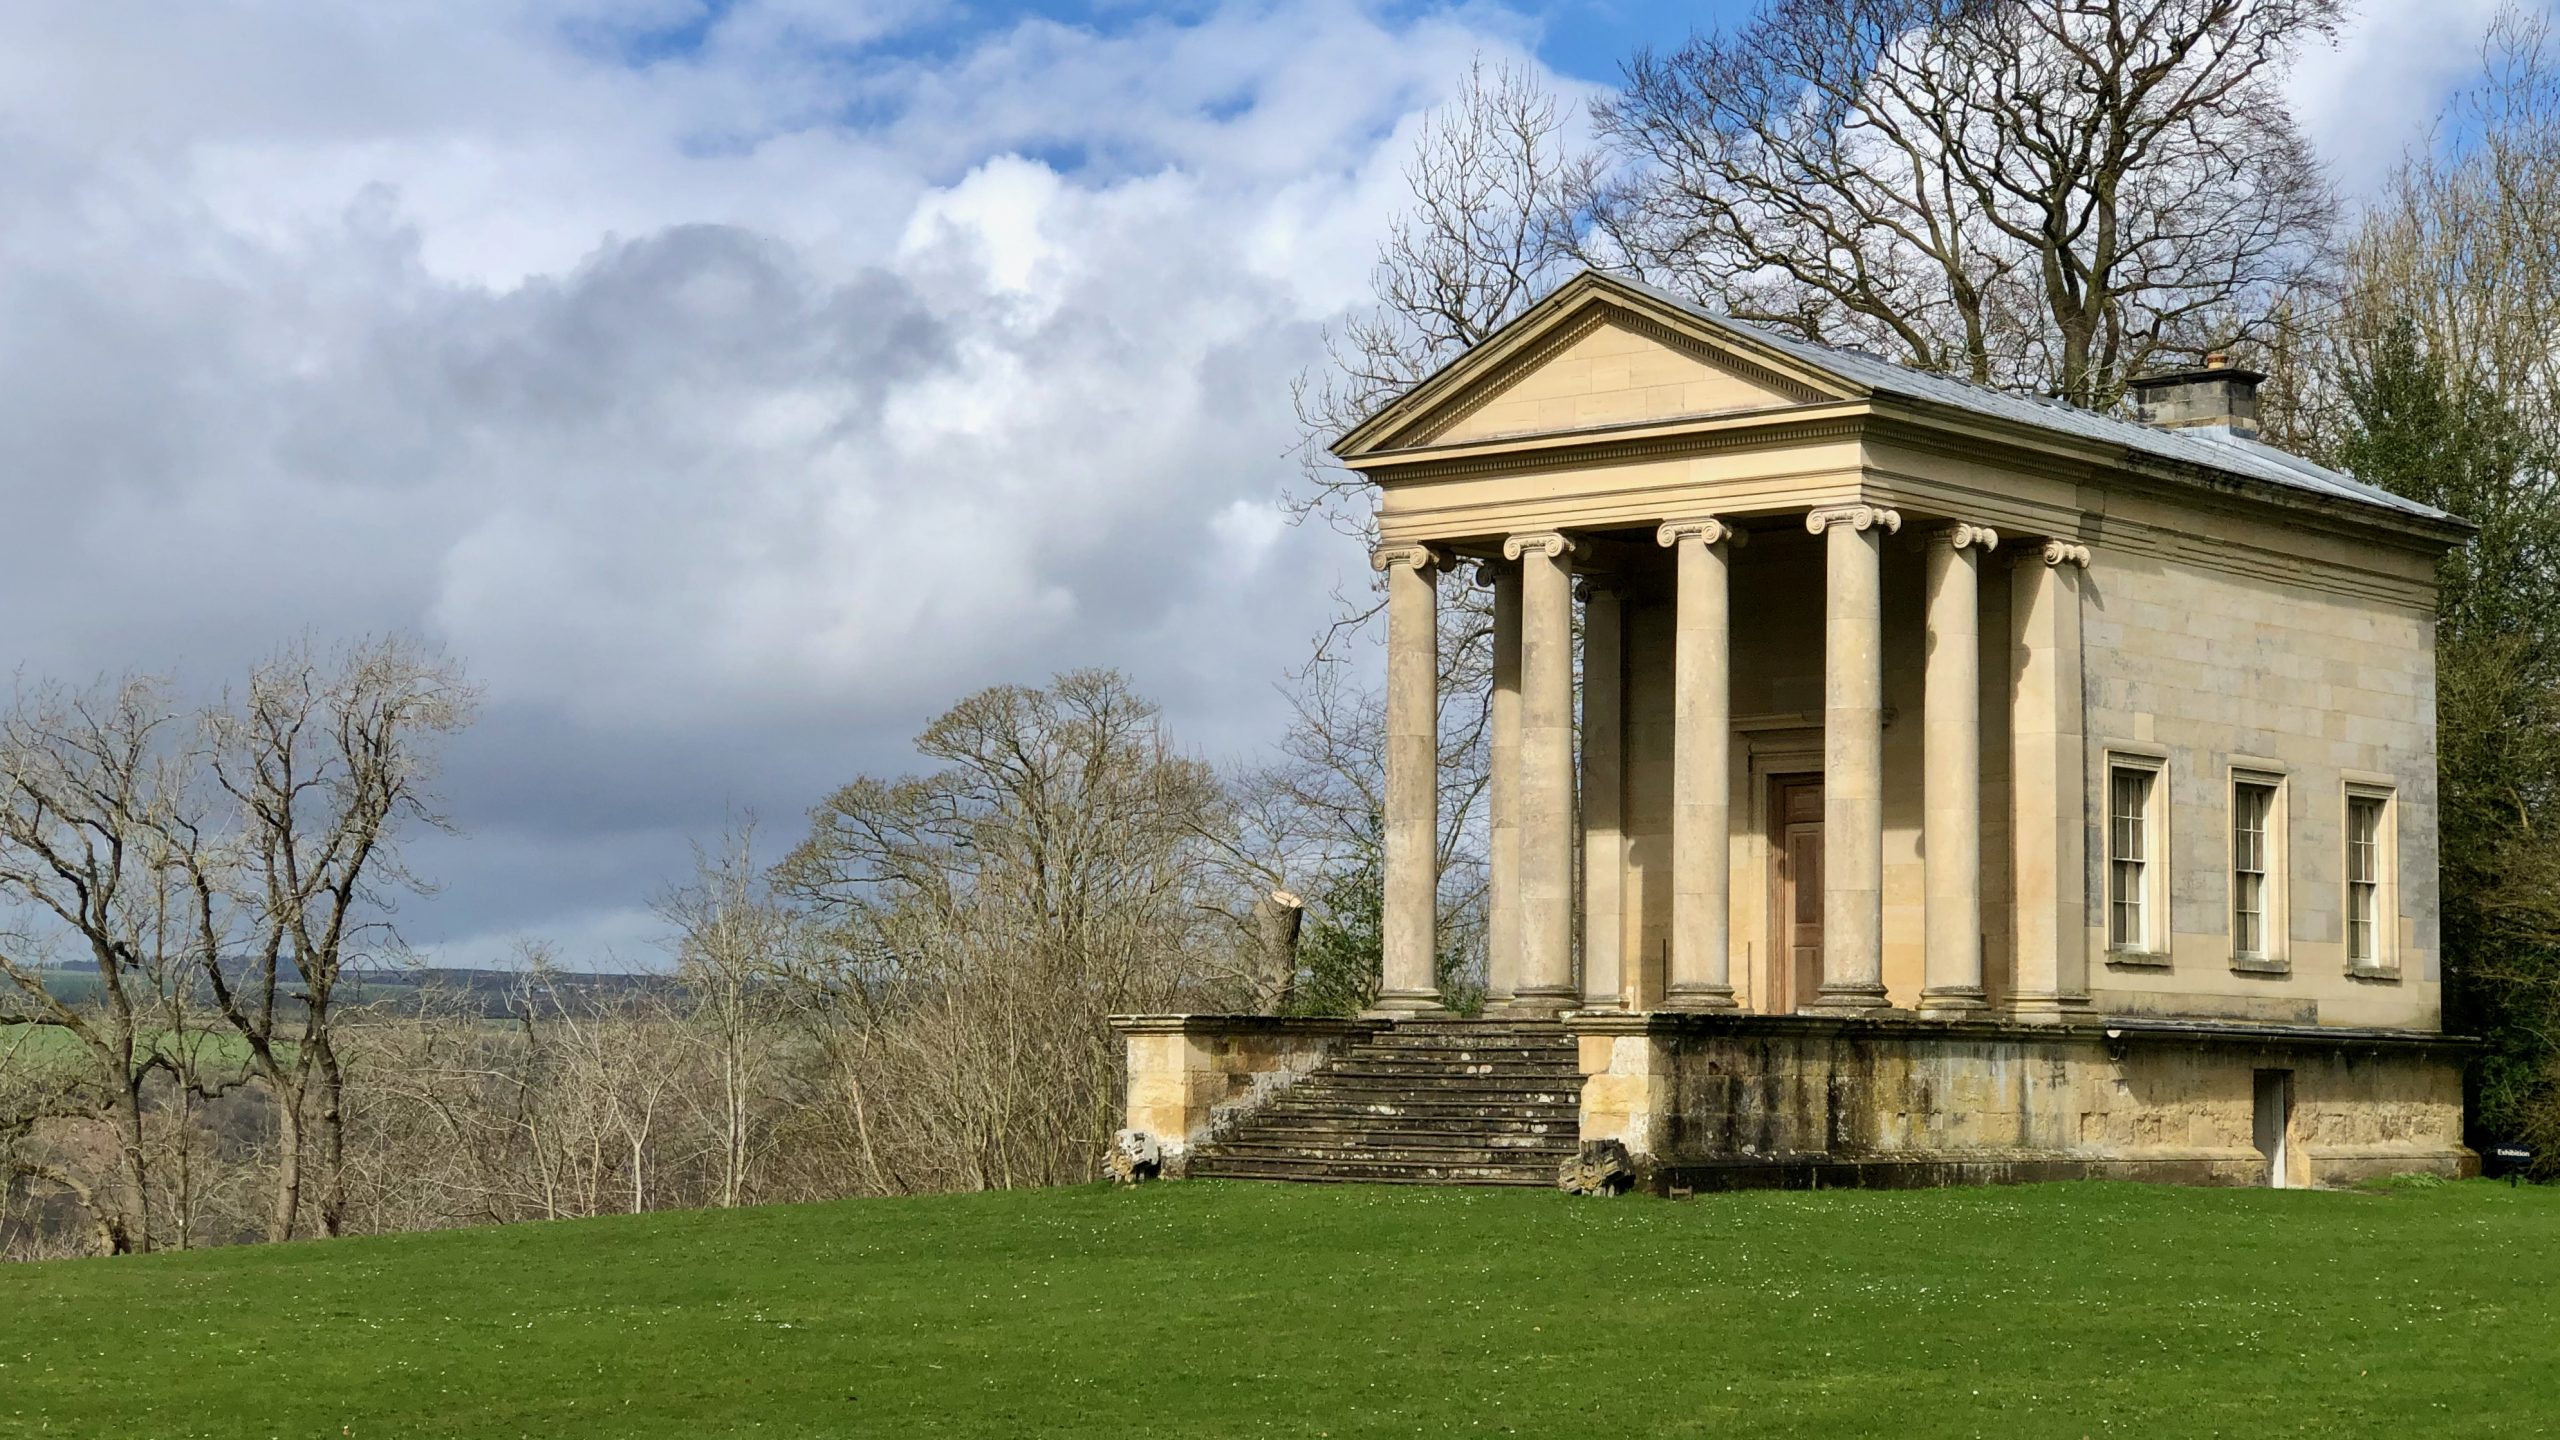 View of the stone built Ionic Temple at Rievaulx Terrace